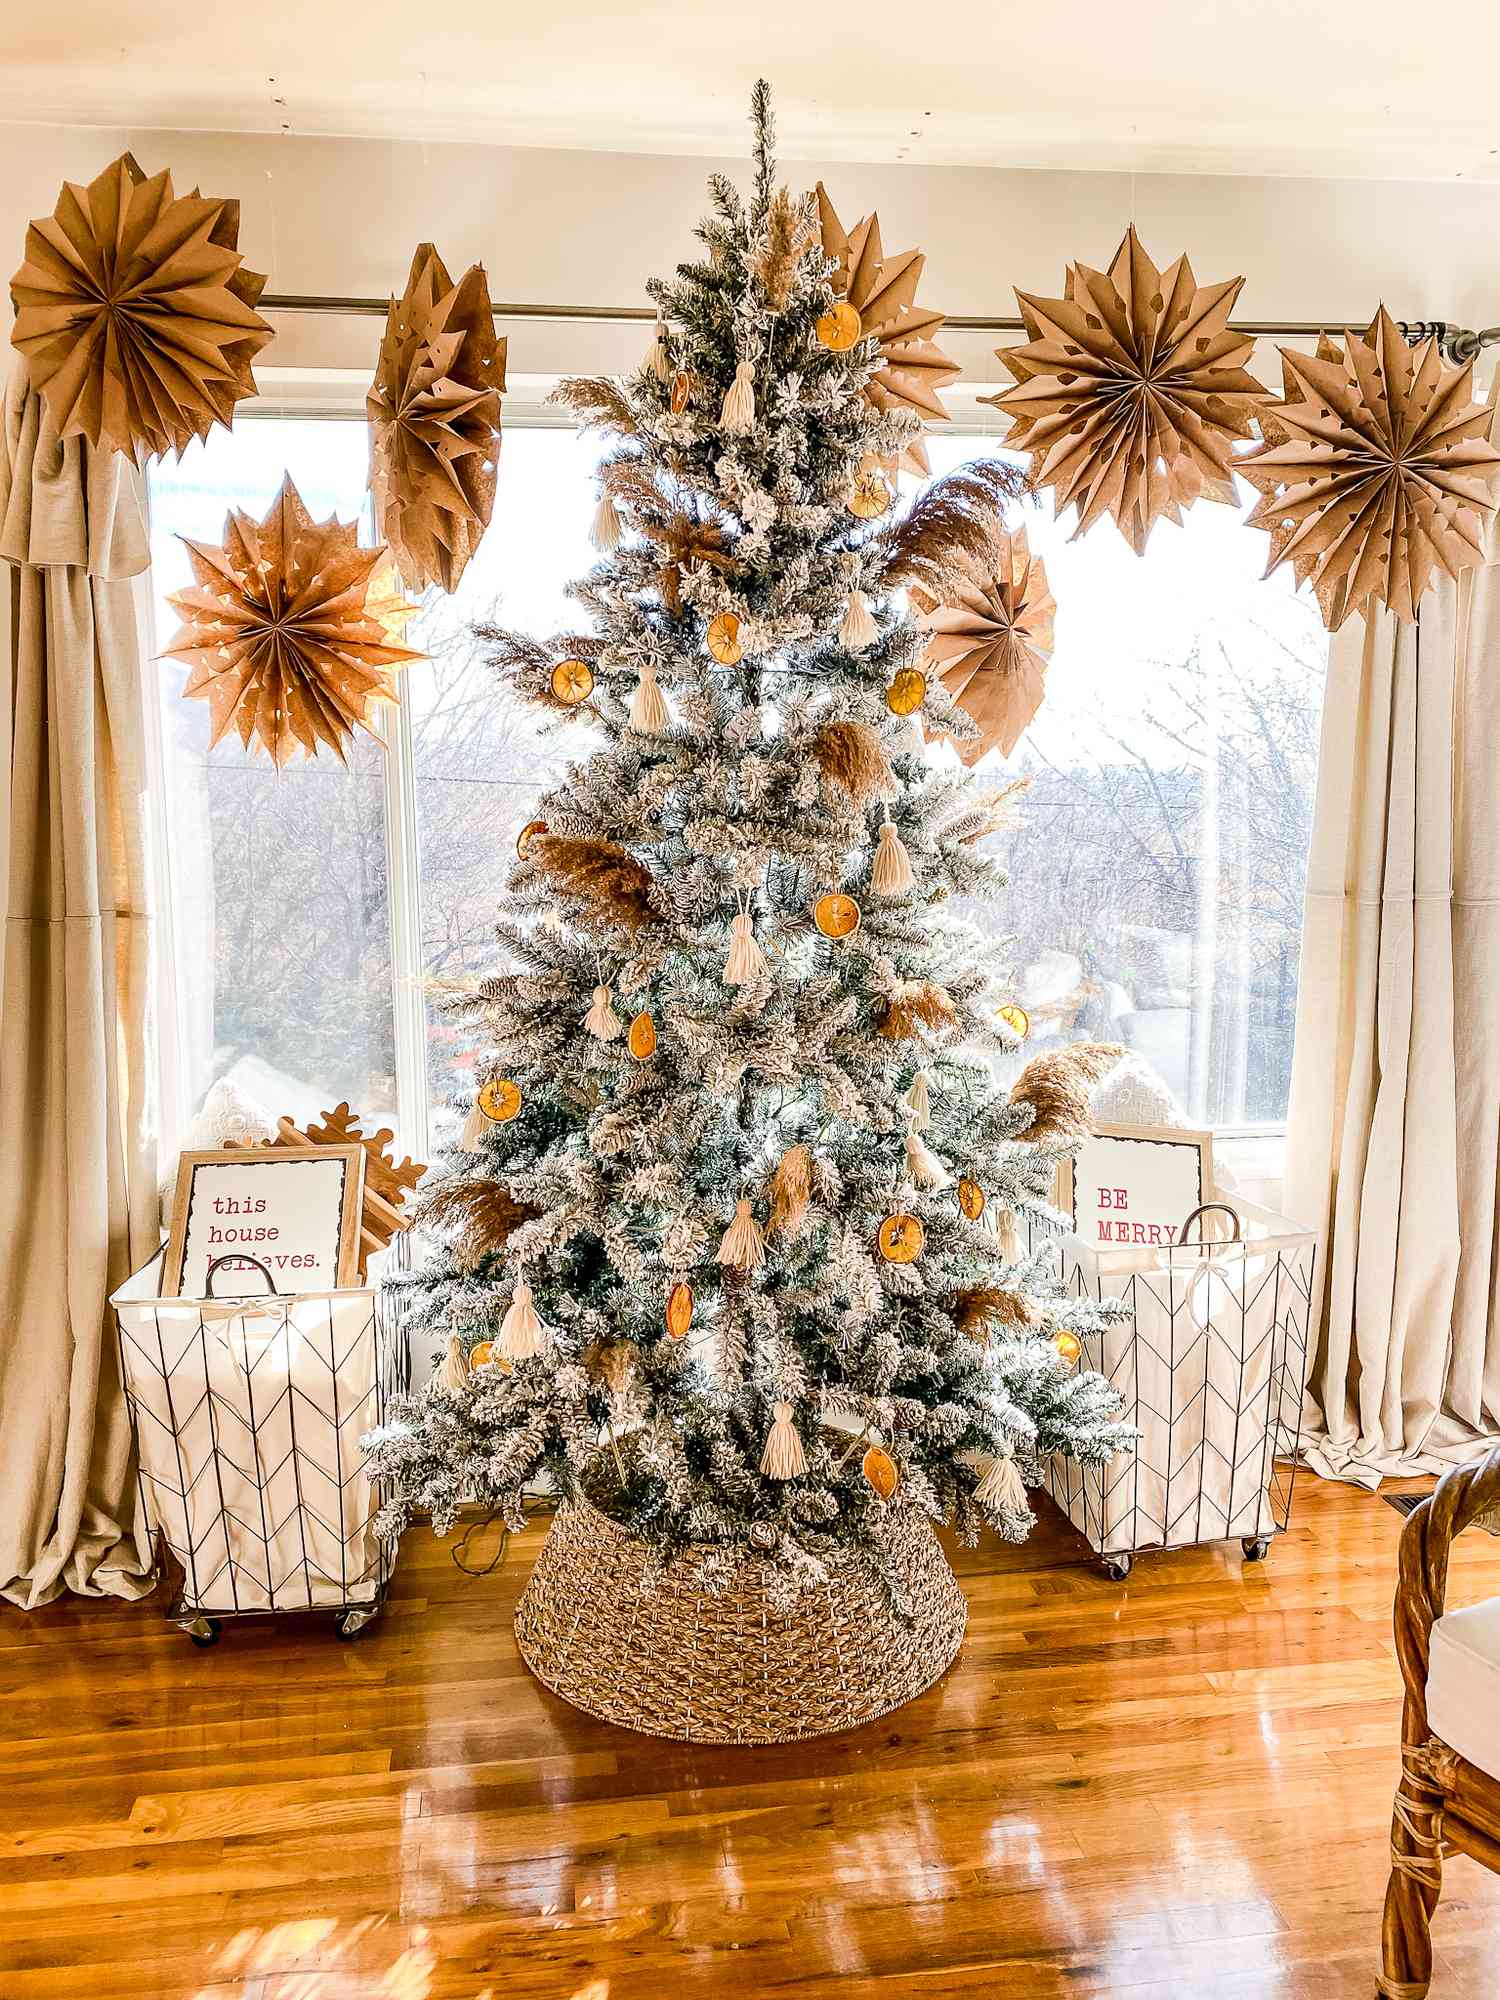 Becky Mickelson's orange-themed Christmas tree